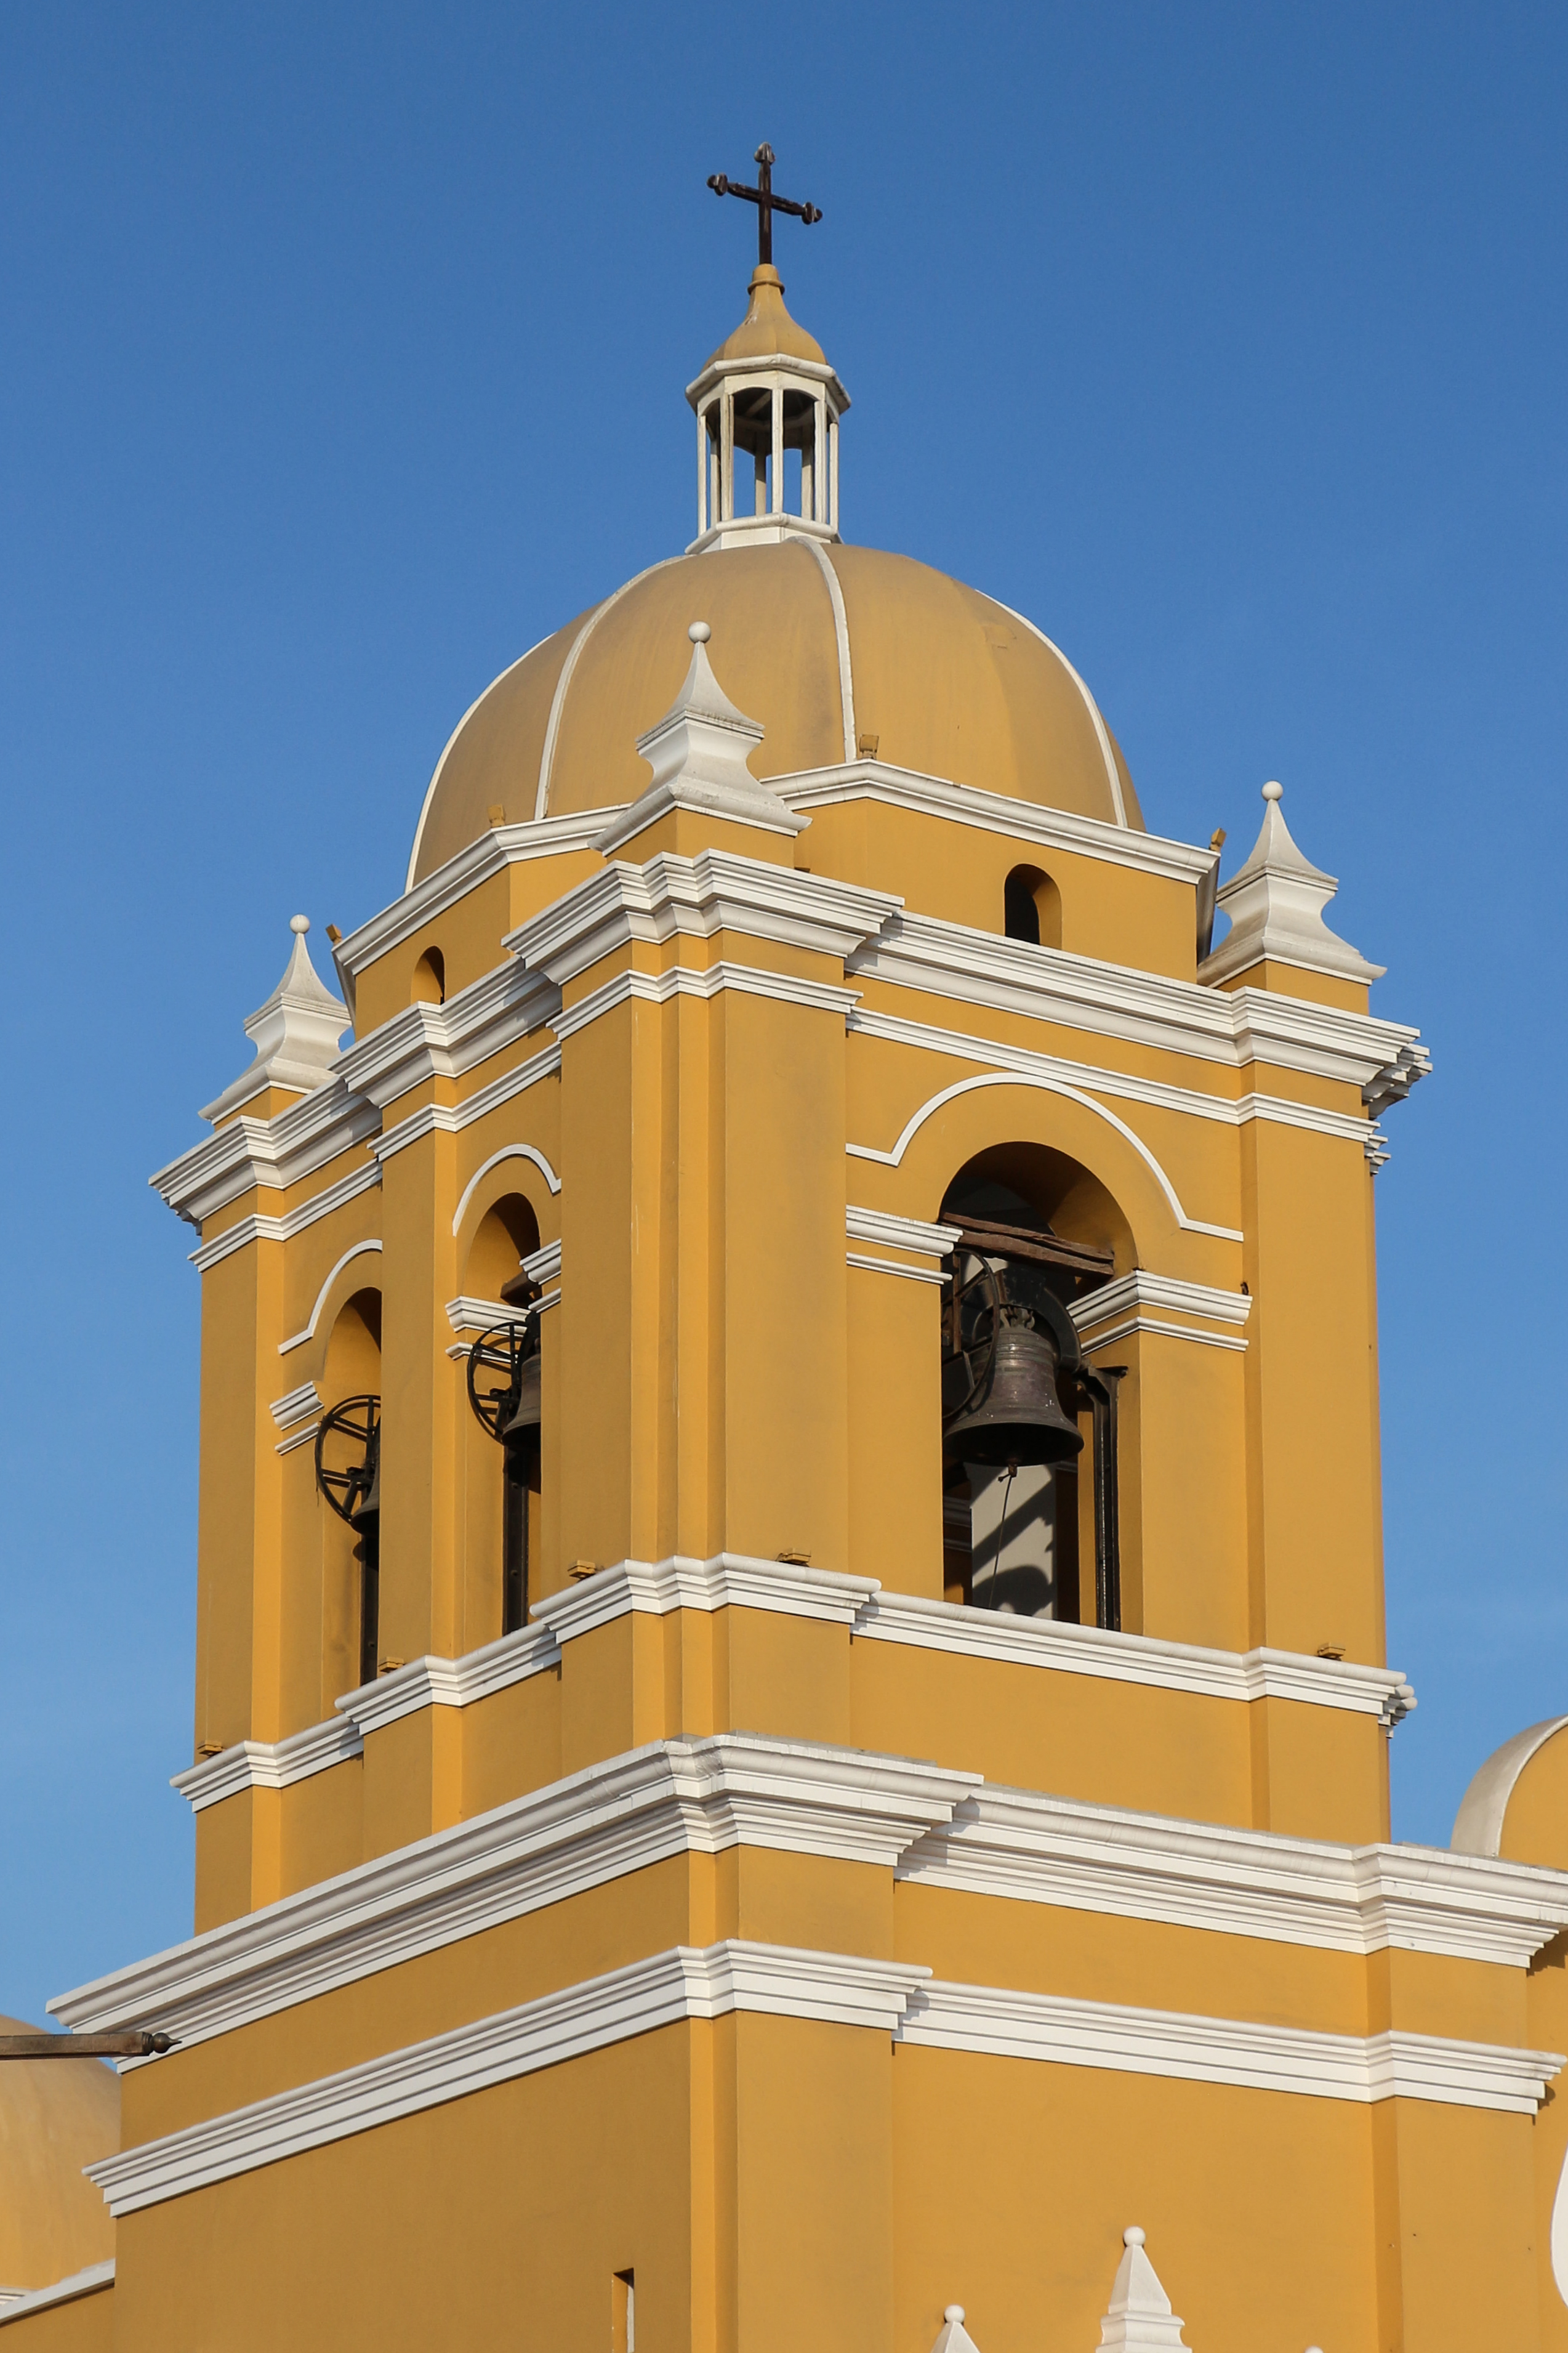 Cathedral of Trujillo, Peru - Bell tower